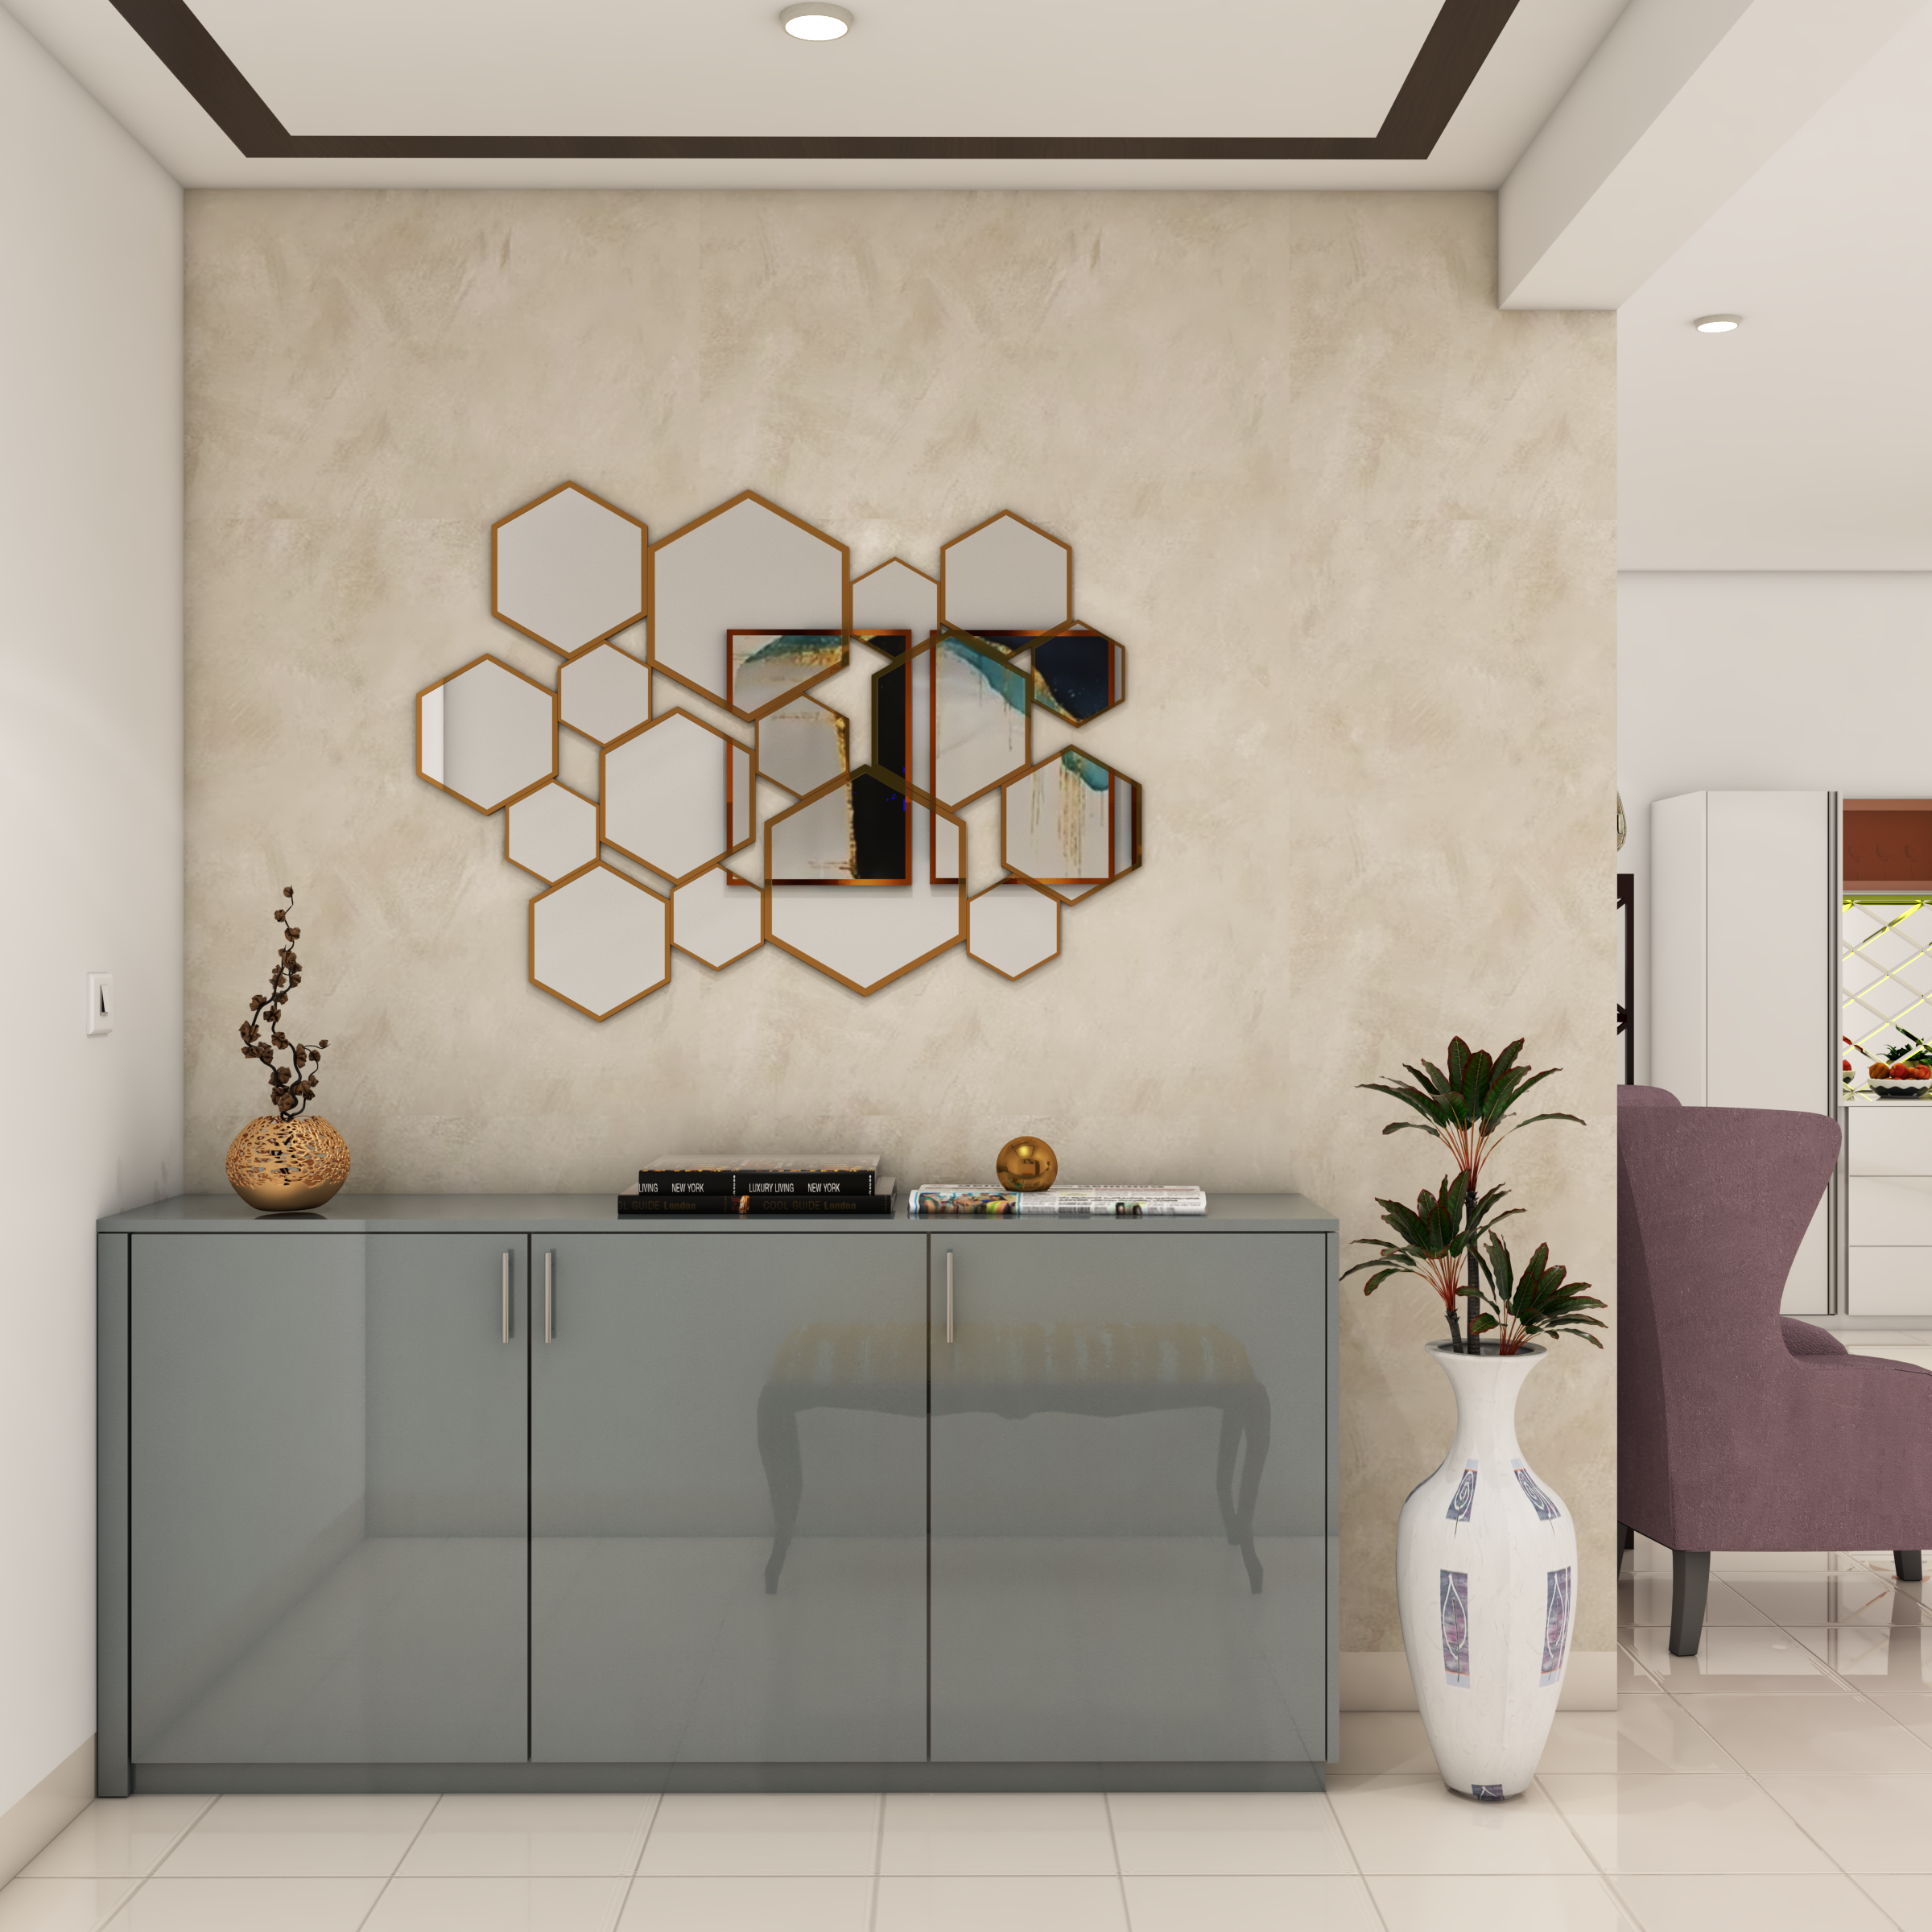 Modern Foyer Design With Grey Storage Unit And Hexagonal Wall Mirrors